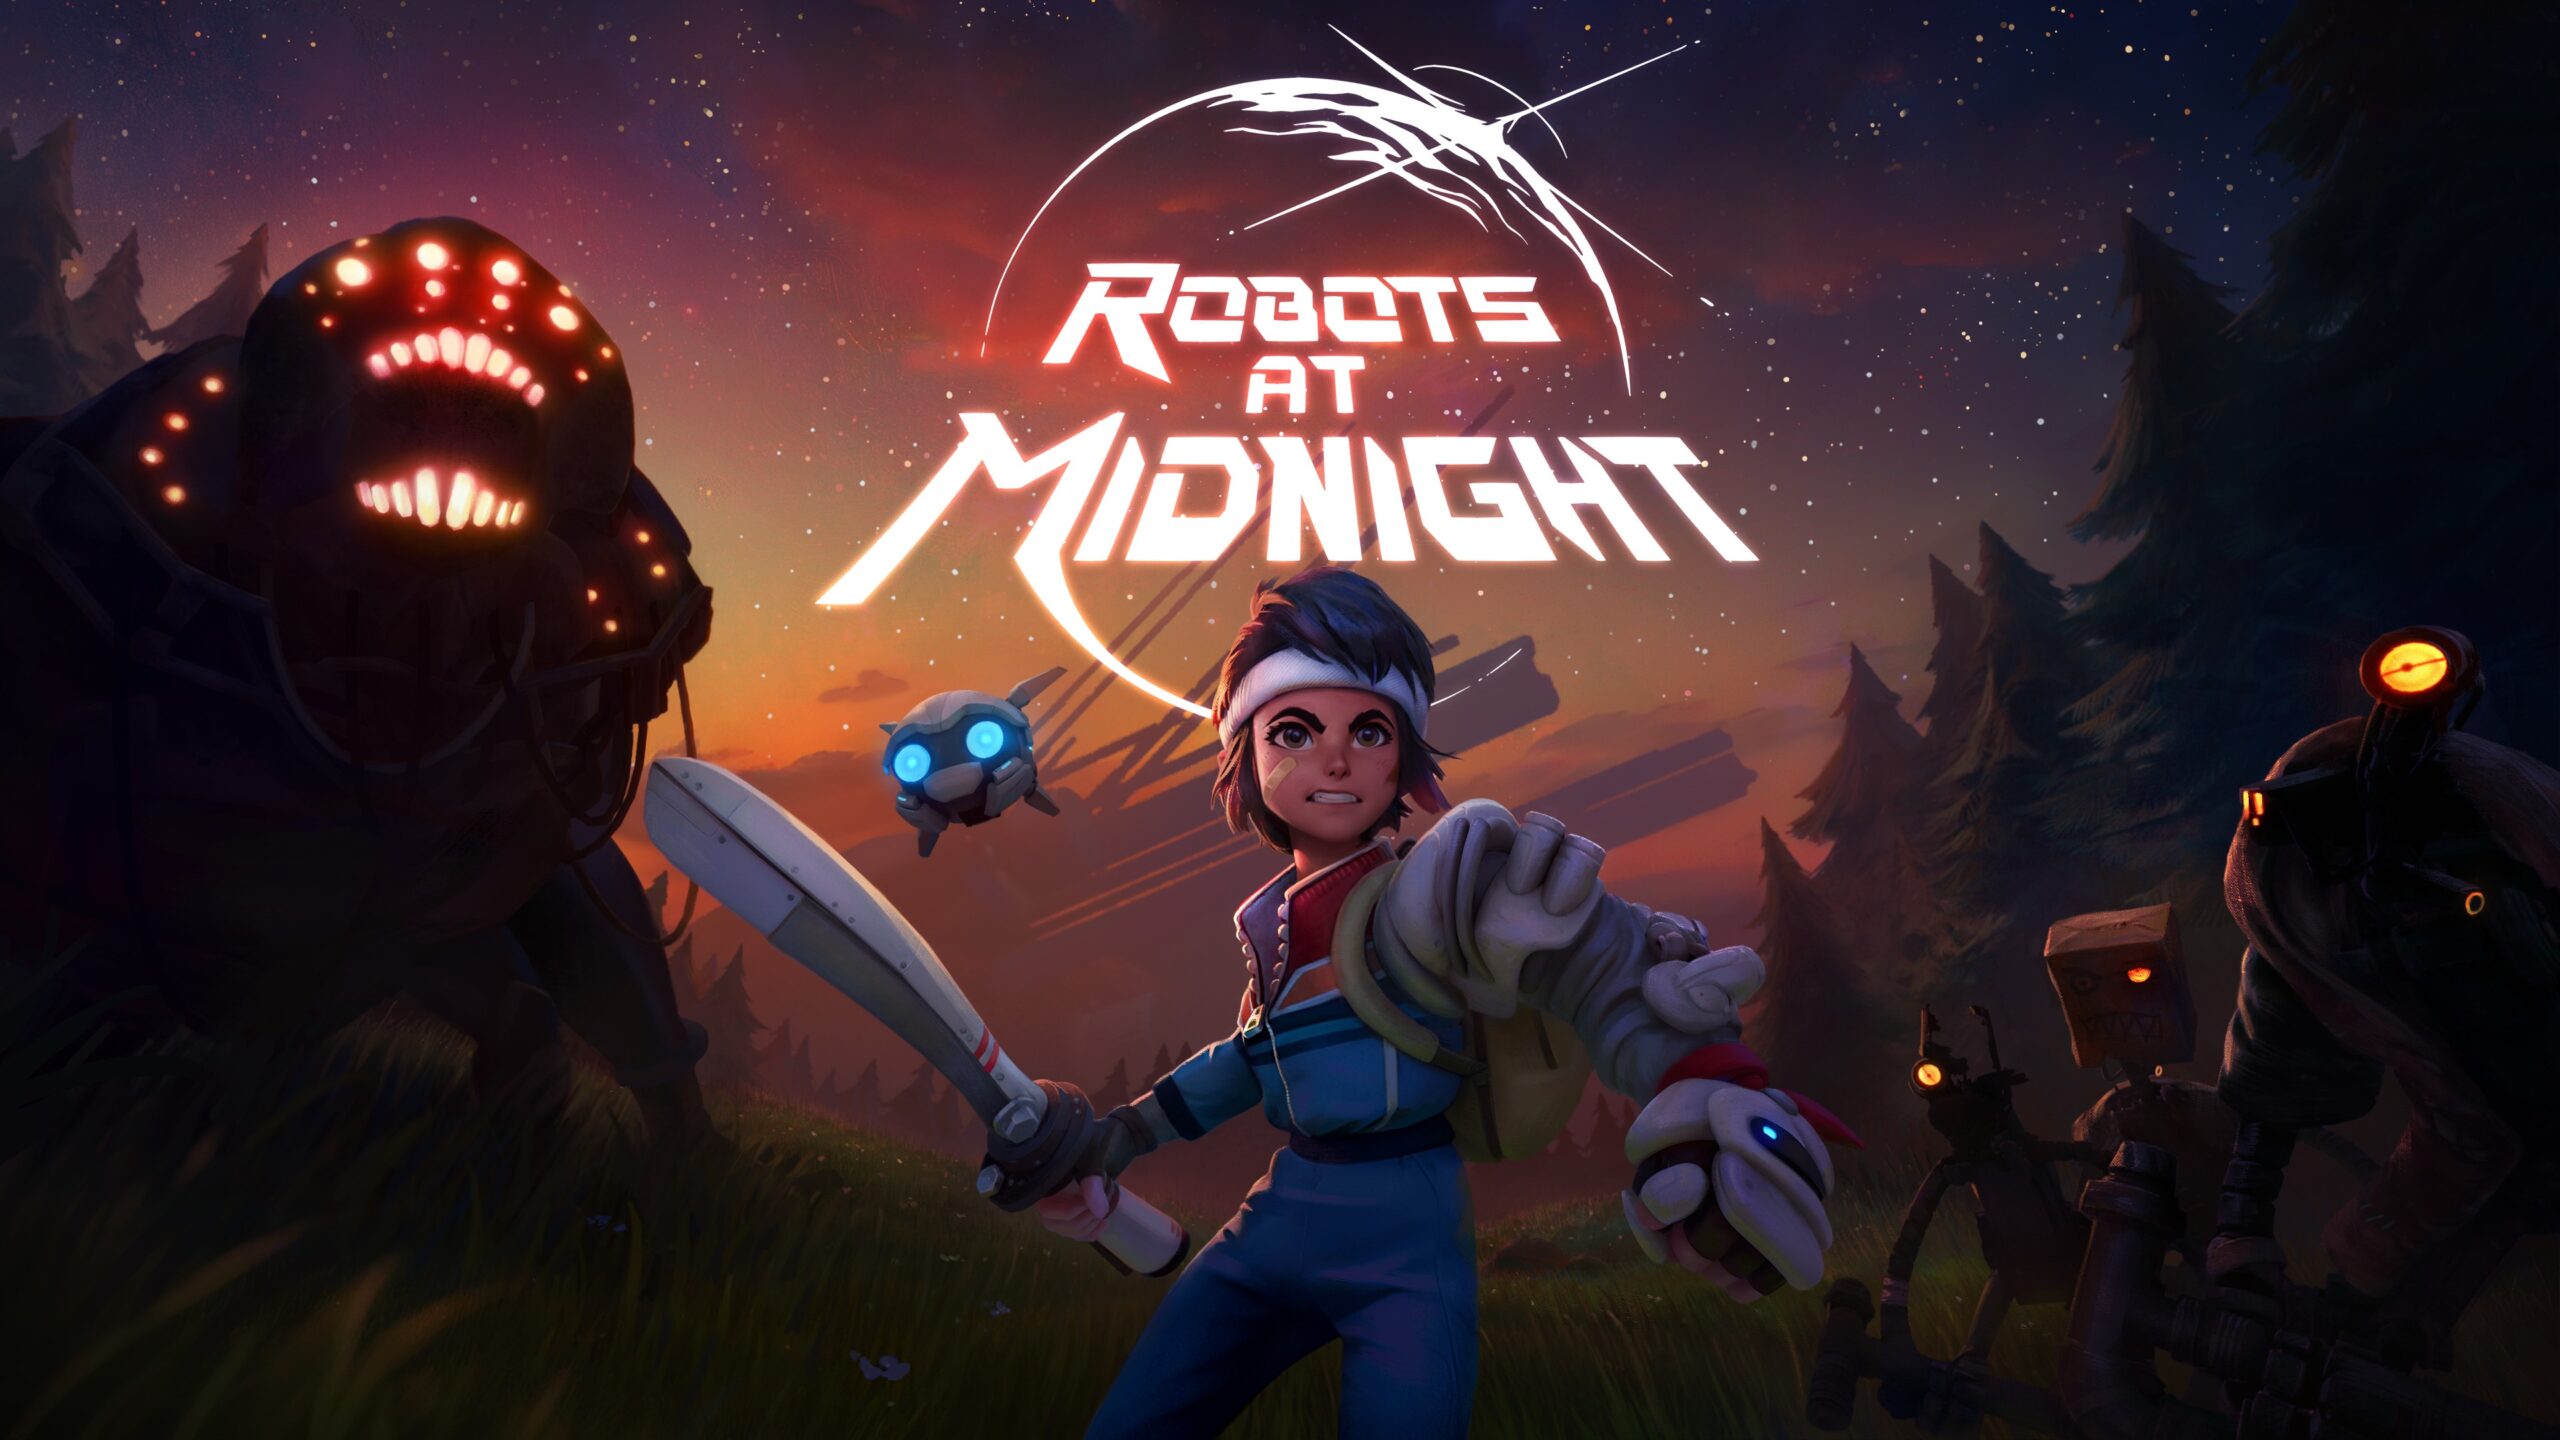 Protected: Robots at Midnight